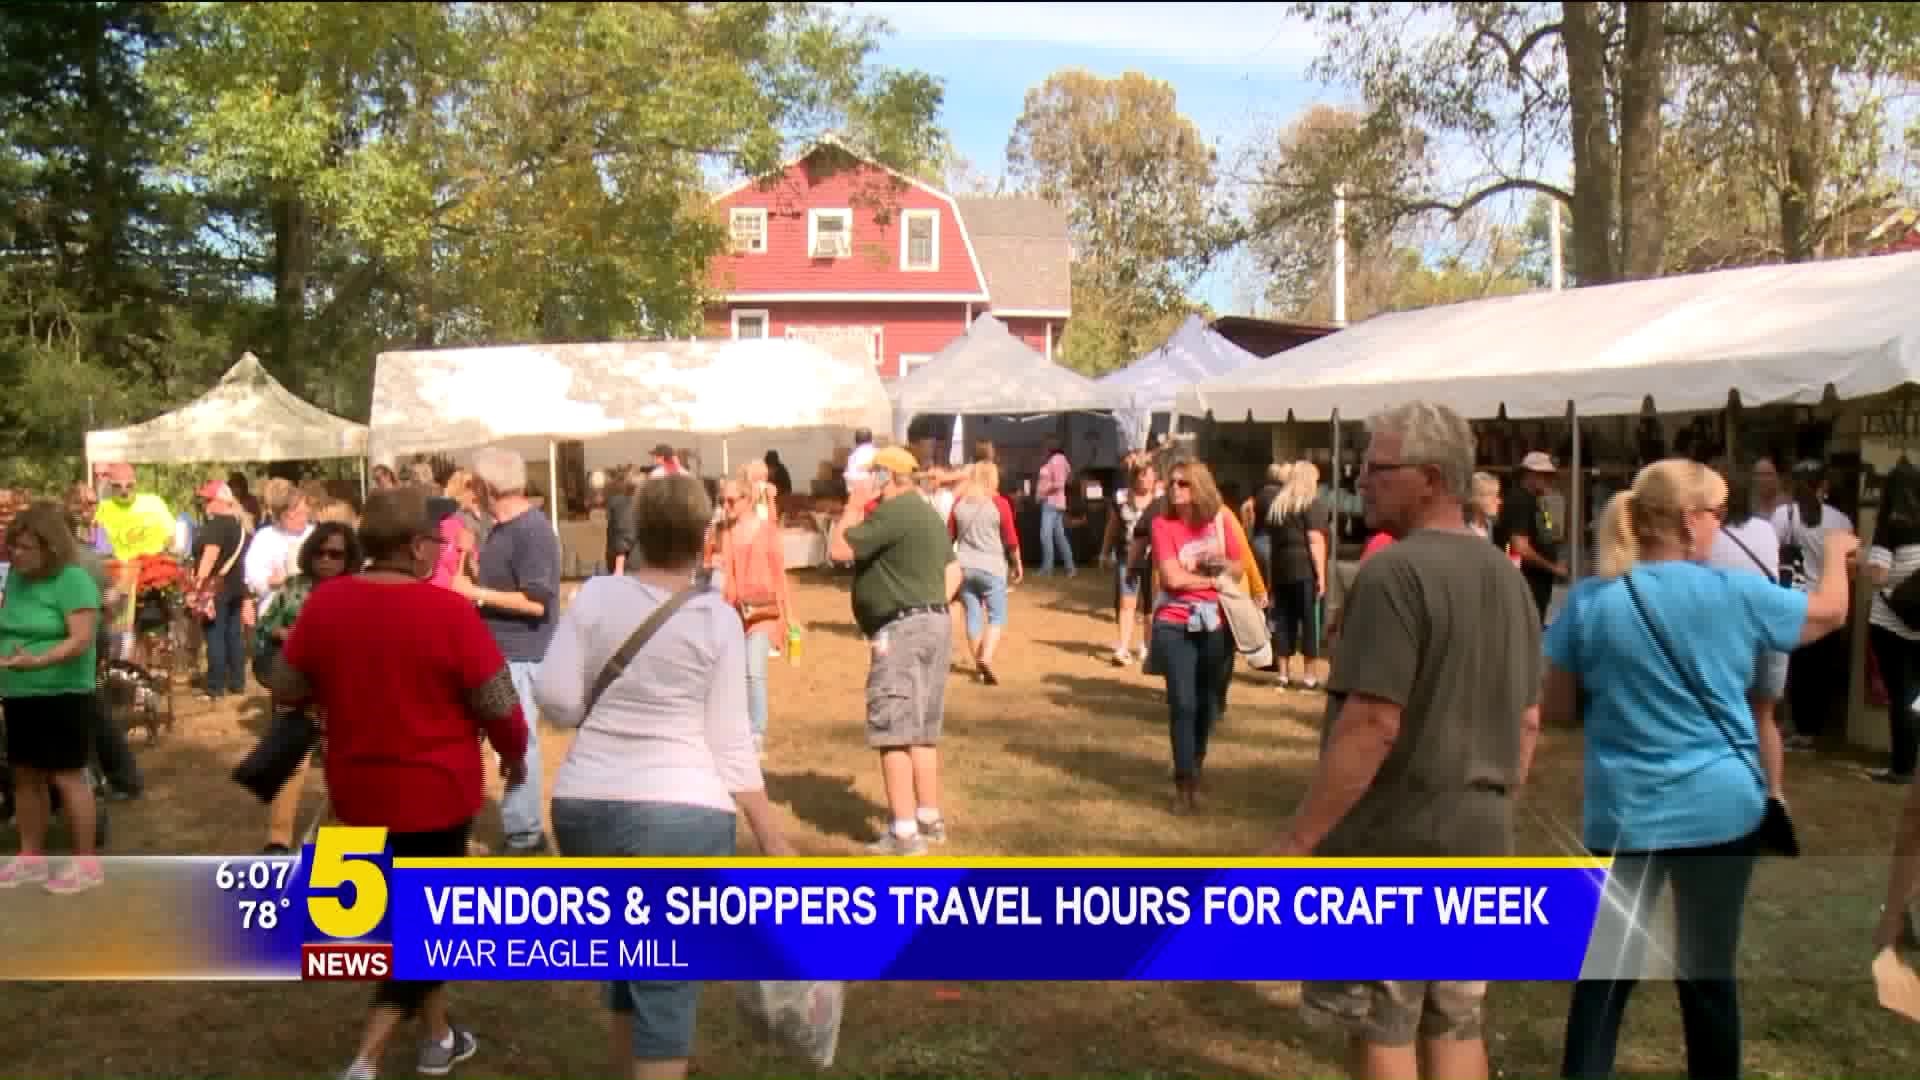 Vendors & Shoppers Travel Hours For Craft Week